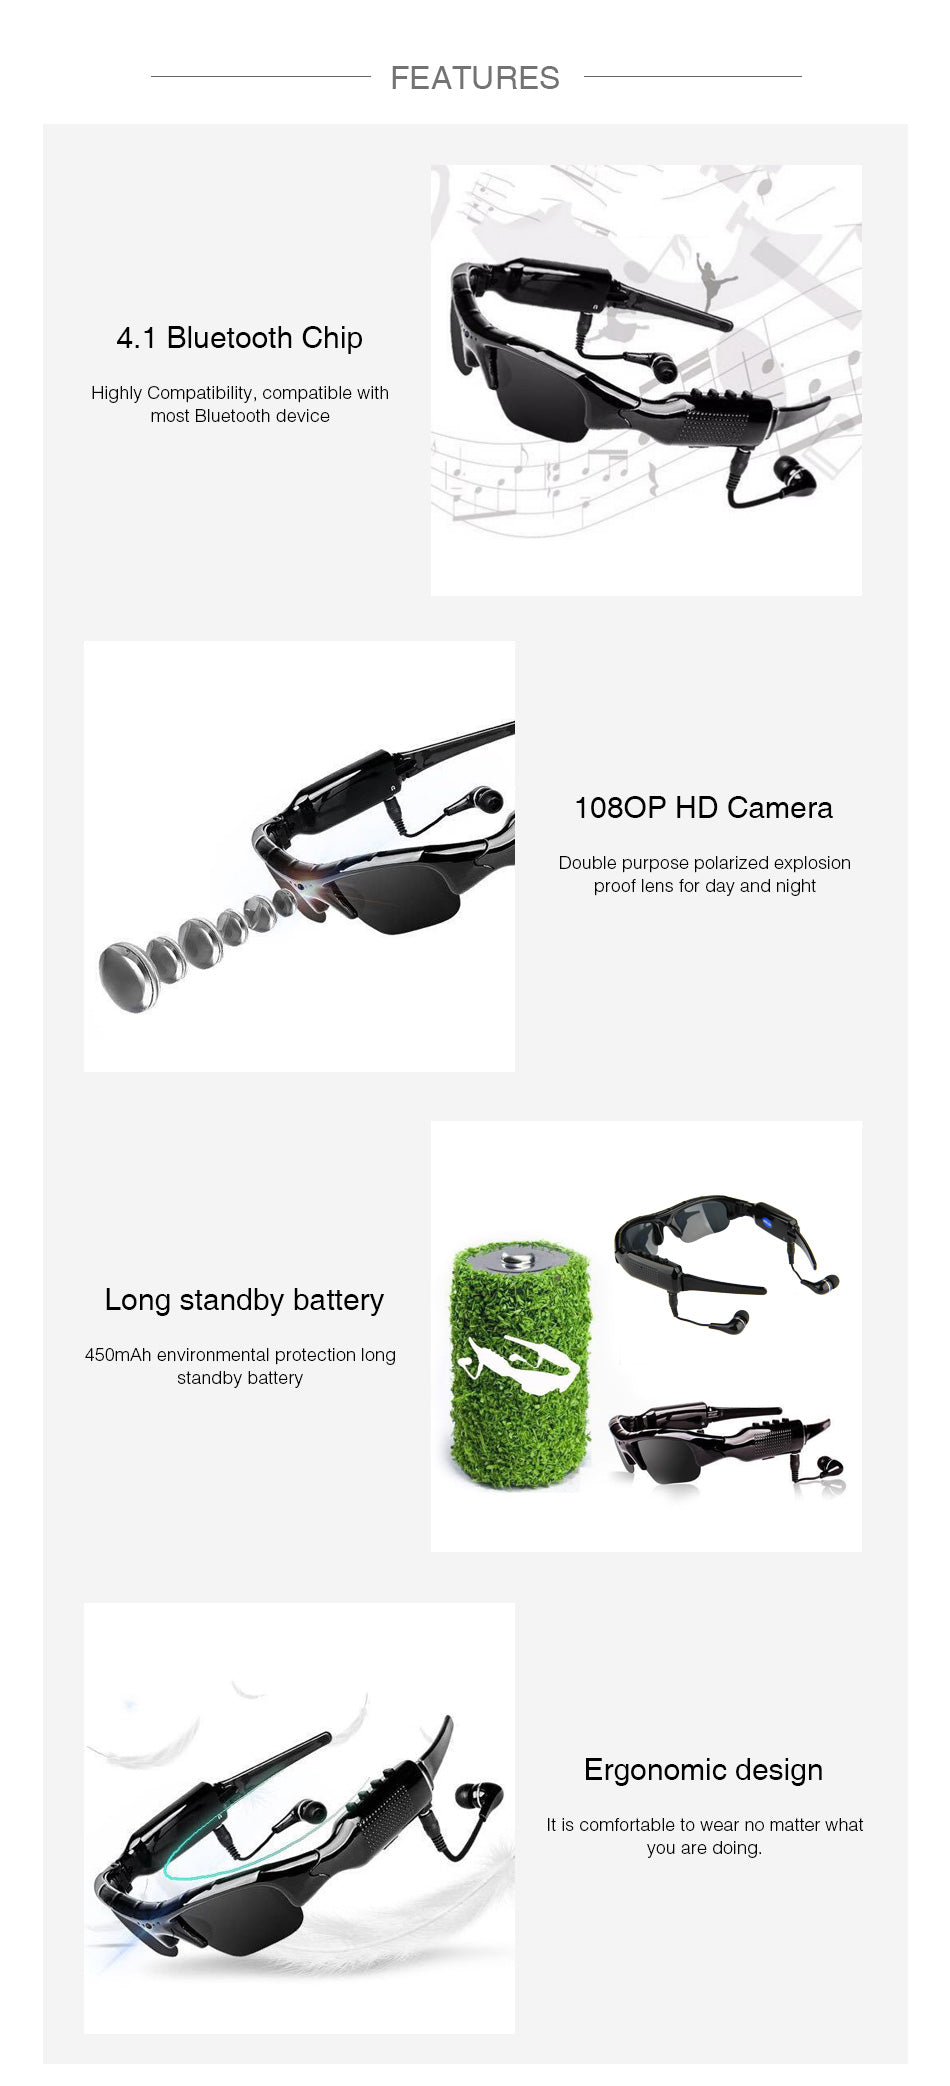 Polorized Spy Glasses w/ Video and Audio Recording - SpyTechStop